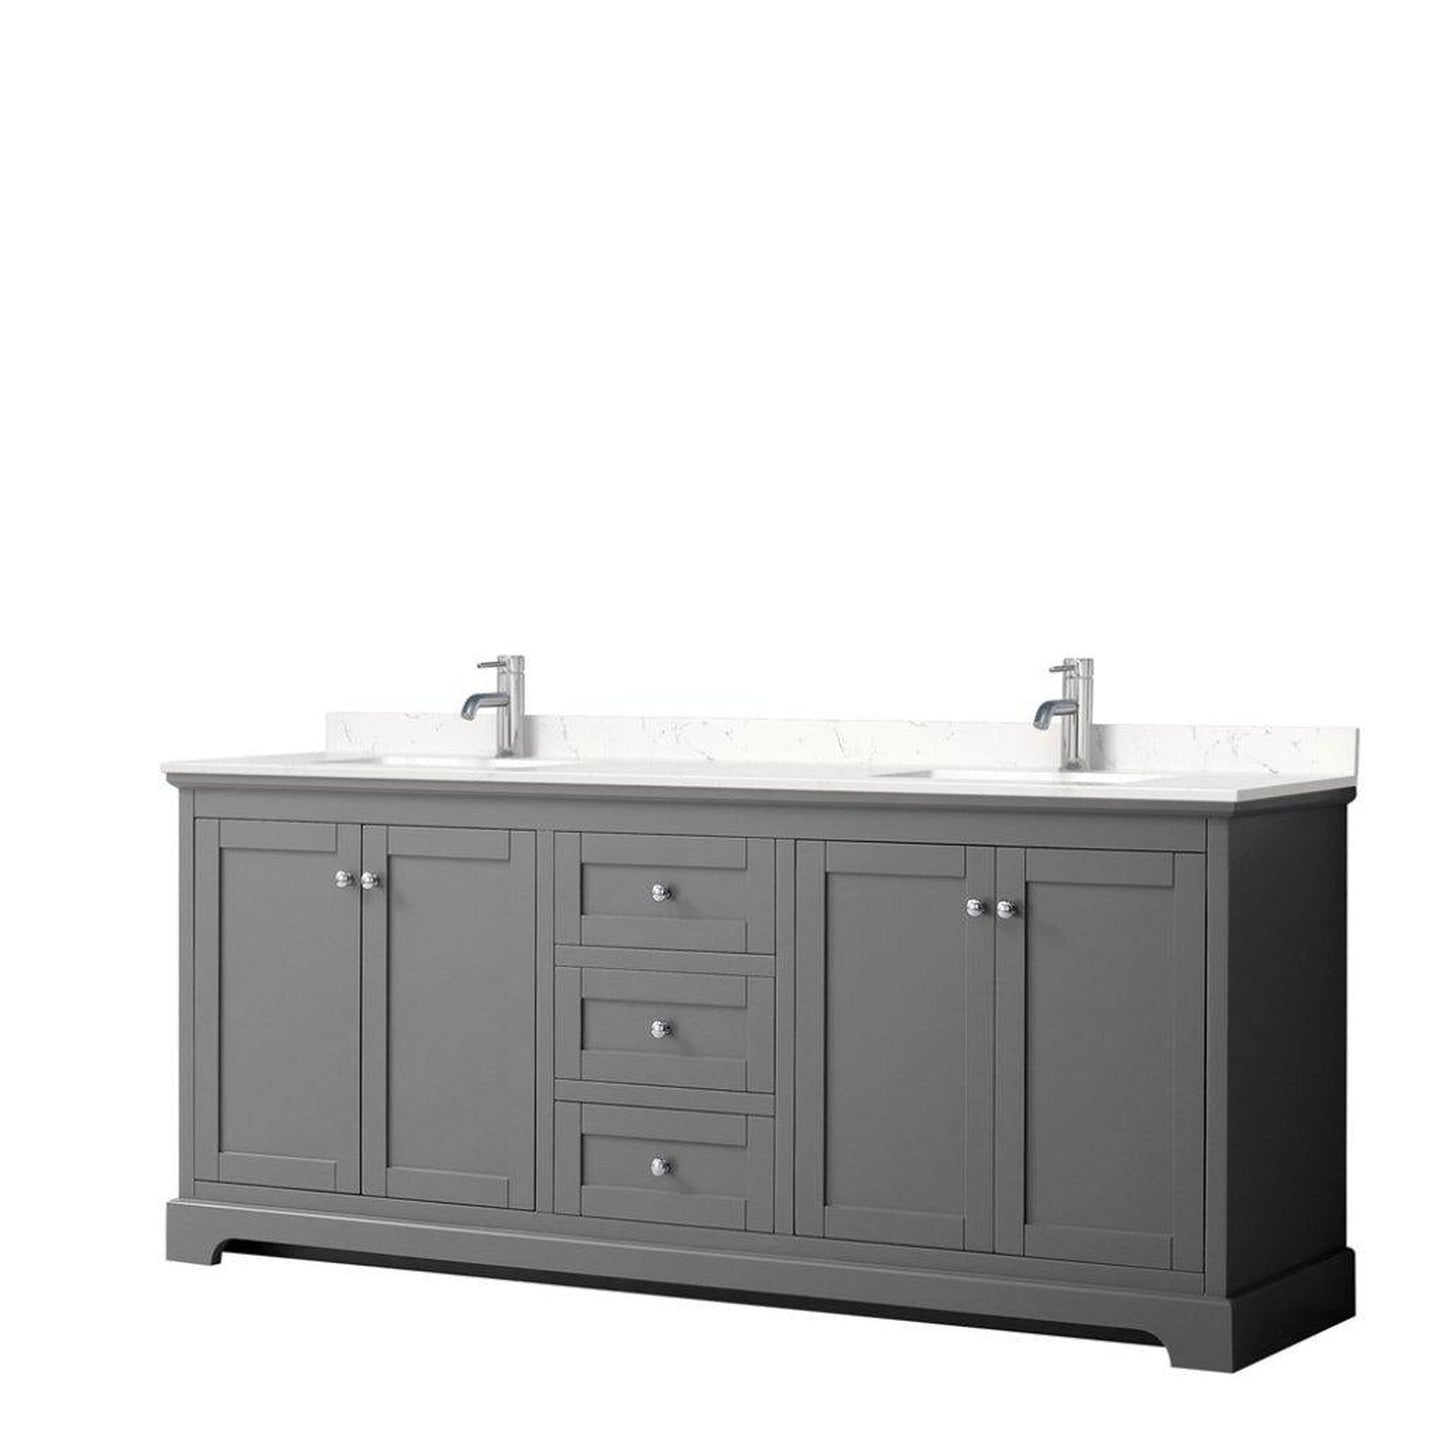 Wyndham Collection Avery 80" Dark Gray Double Bathroom Vanity With Light-Vein Cultured Marble Countertop With 1-Hole Faucet And Square Sink